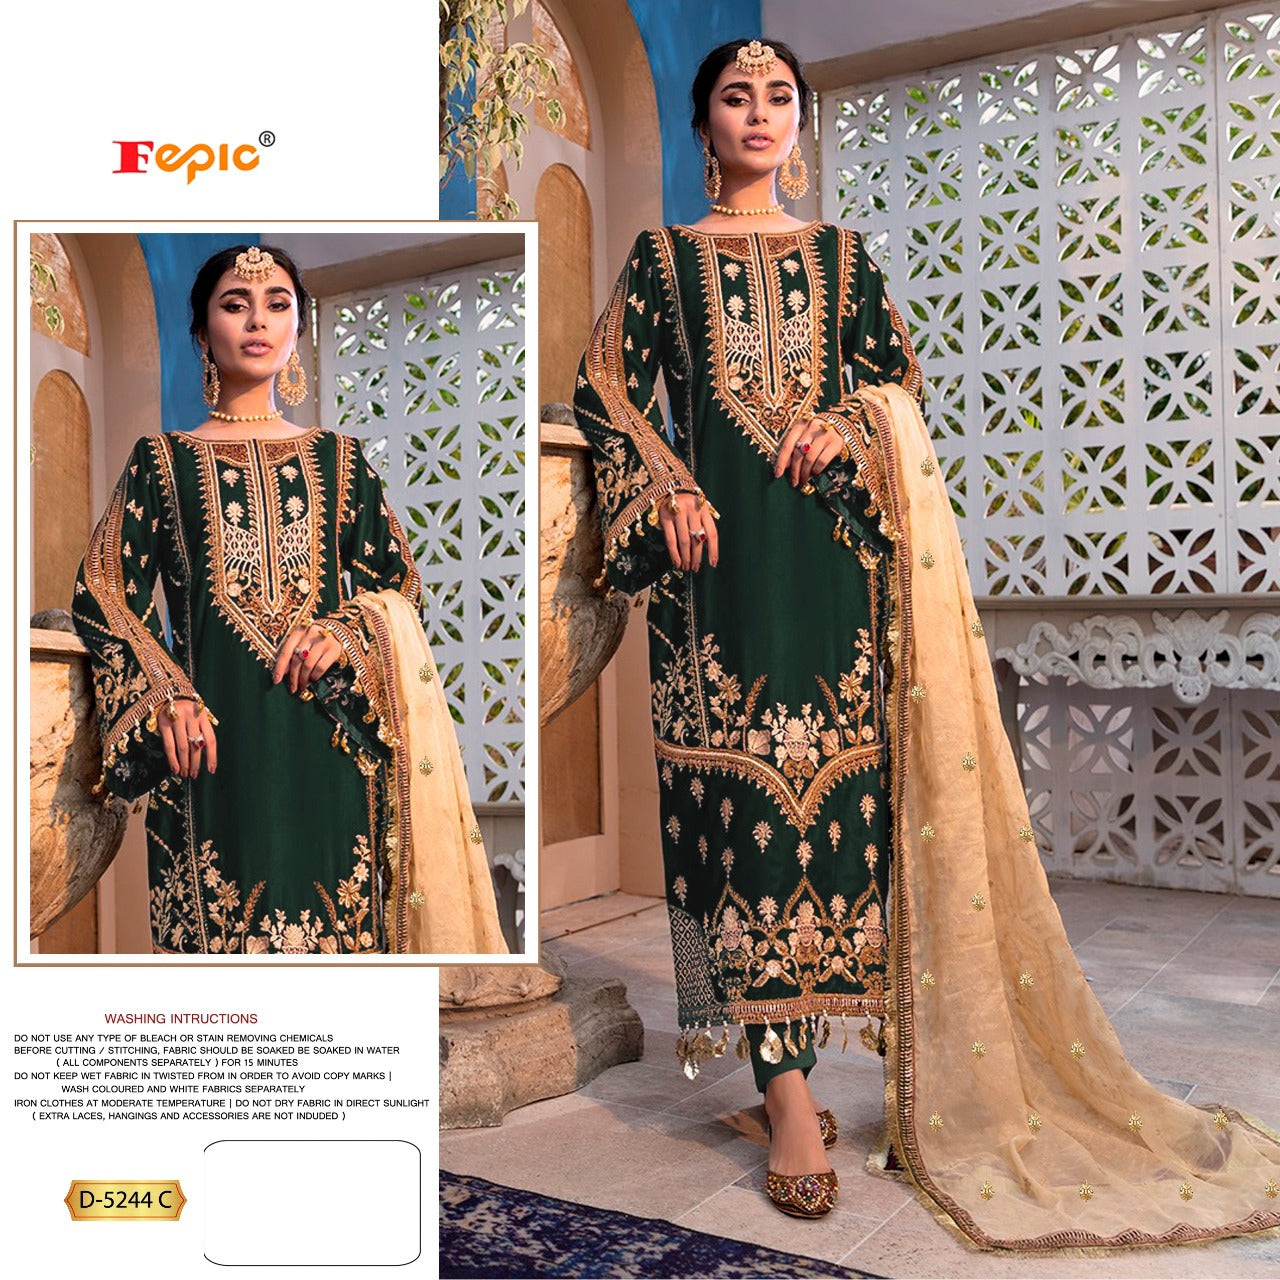 FEPIC ROSEMEEN D-5244  VELVET SUIT Anant Tex Exports Private Limited